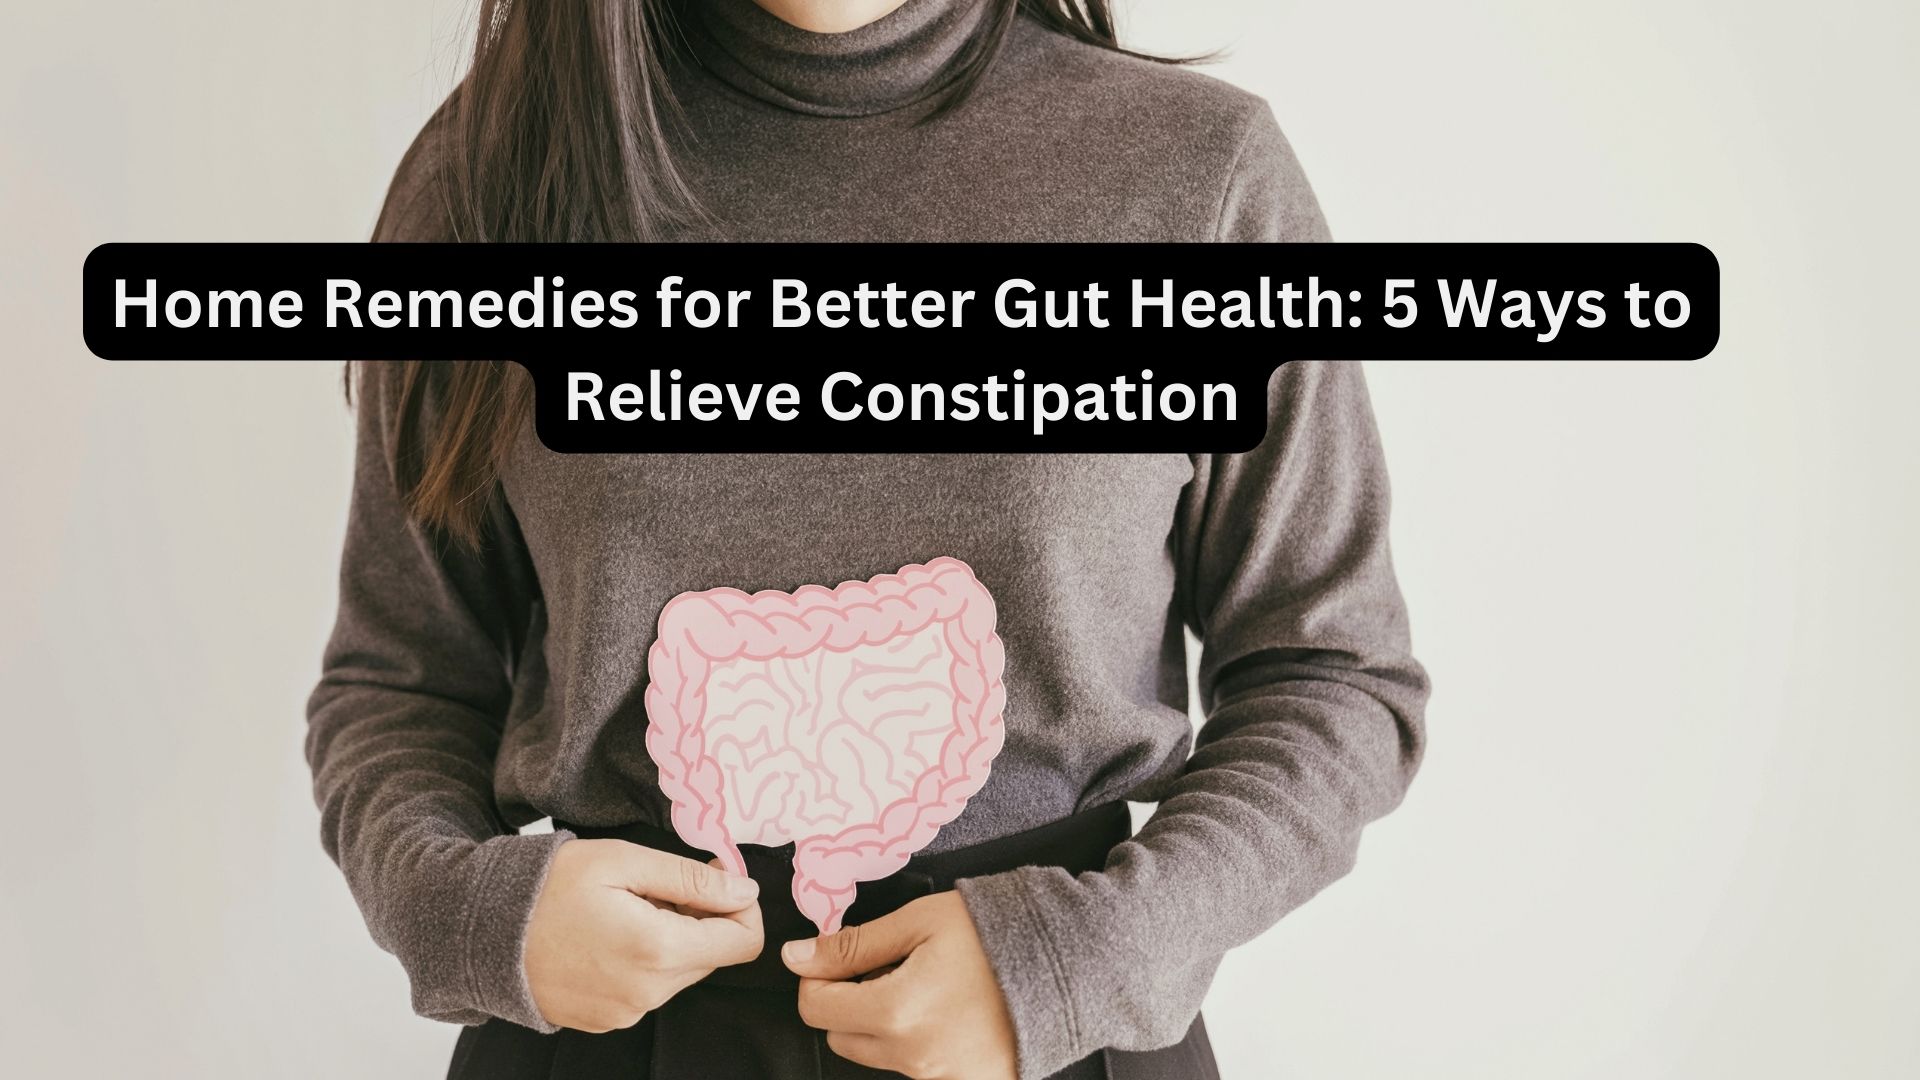 Home Remedies for Better Gut Health: 5 Ways to Relieve Constipation